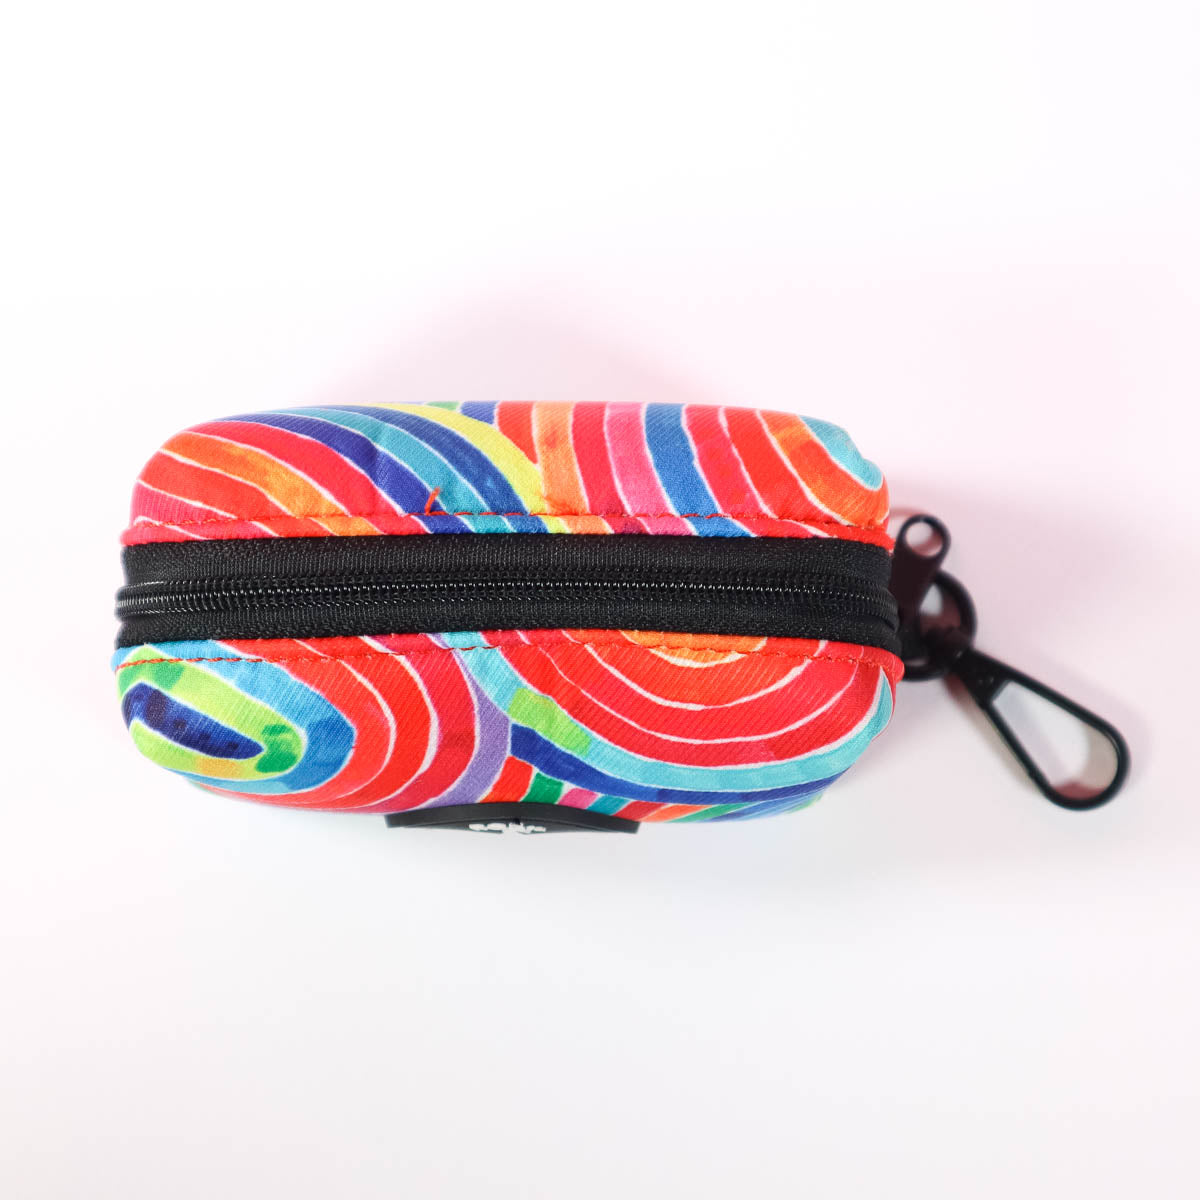 RO x Lordy Dordie Rainbow Pawfect Waste Bag Holder